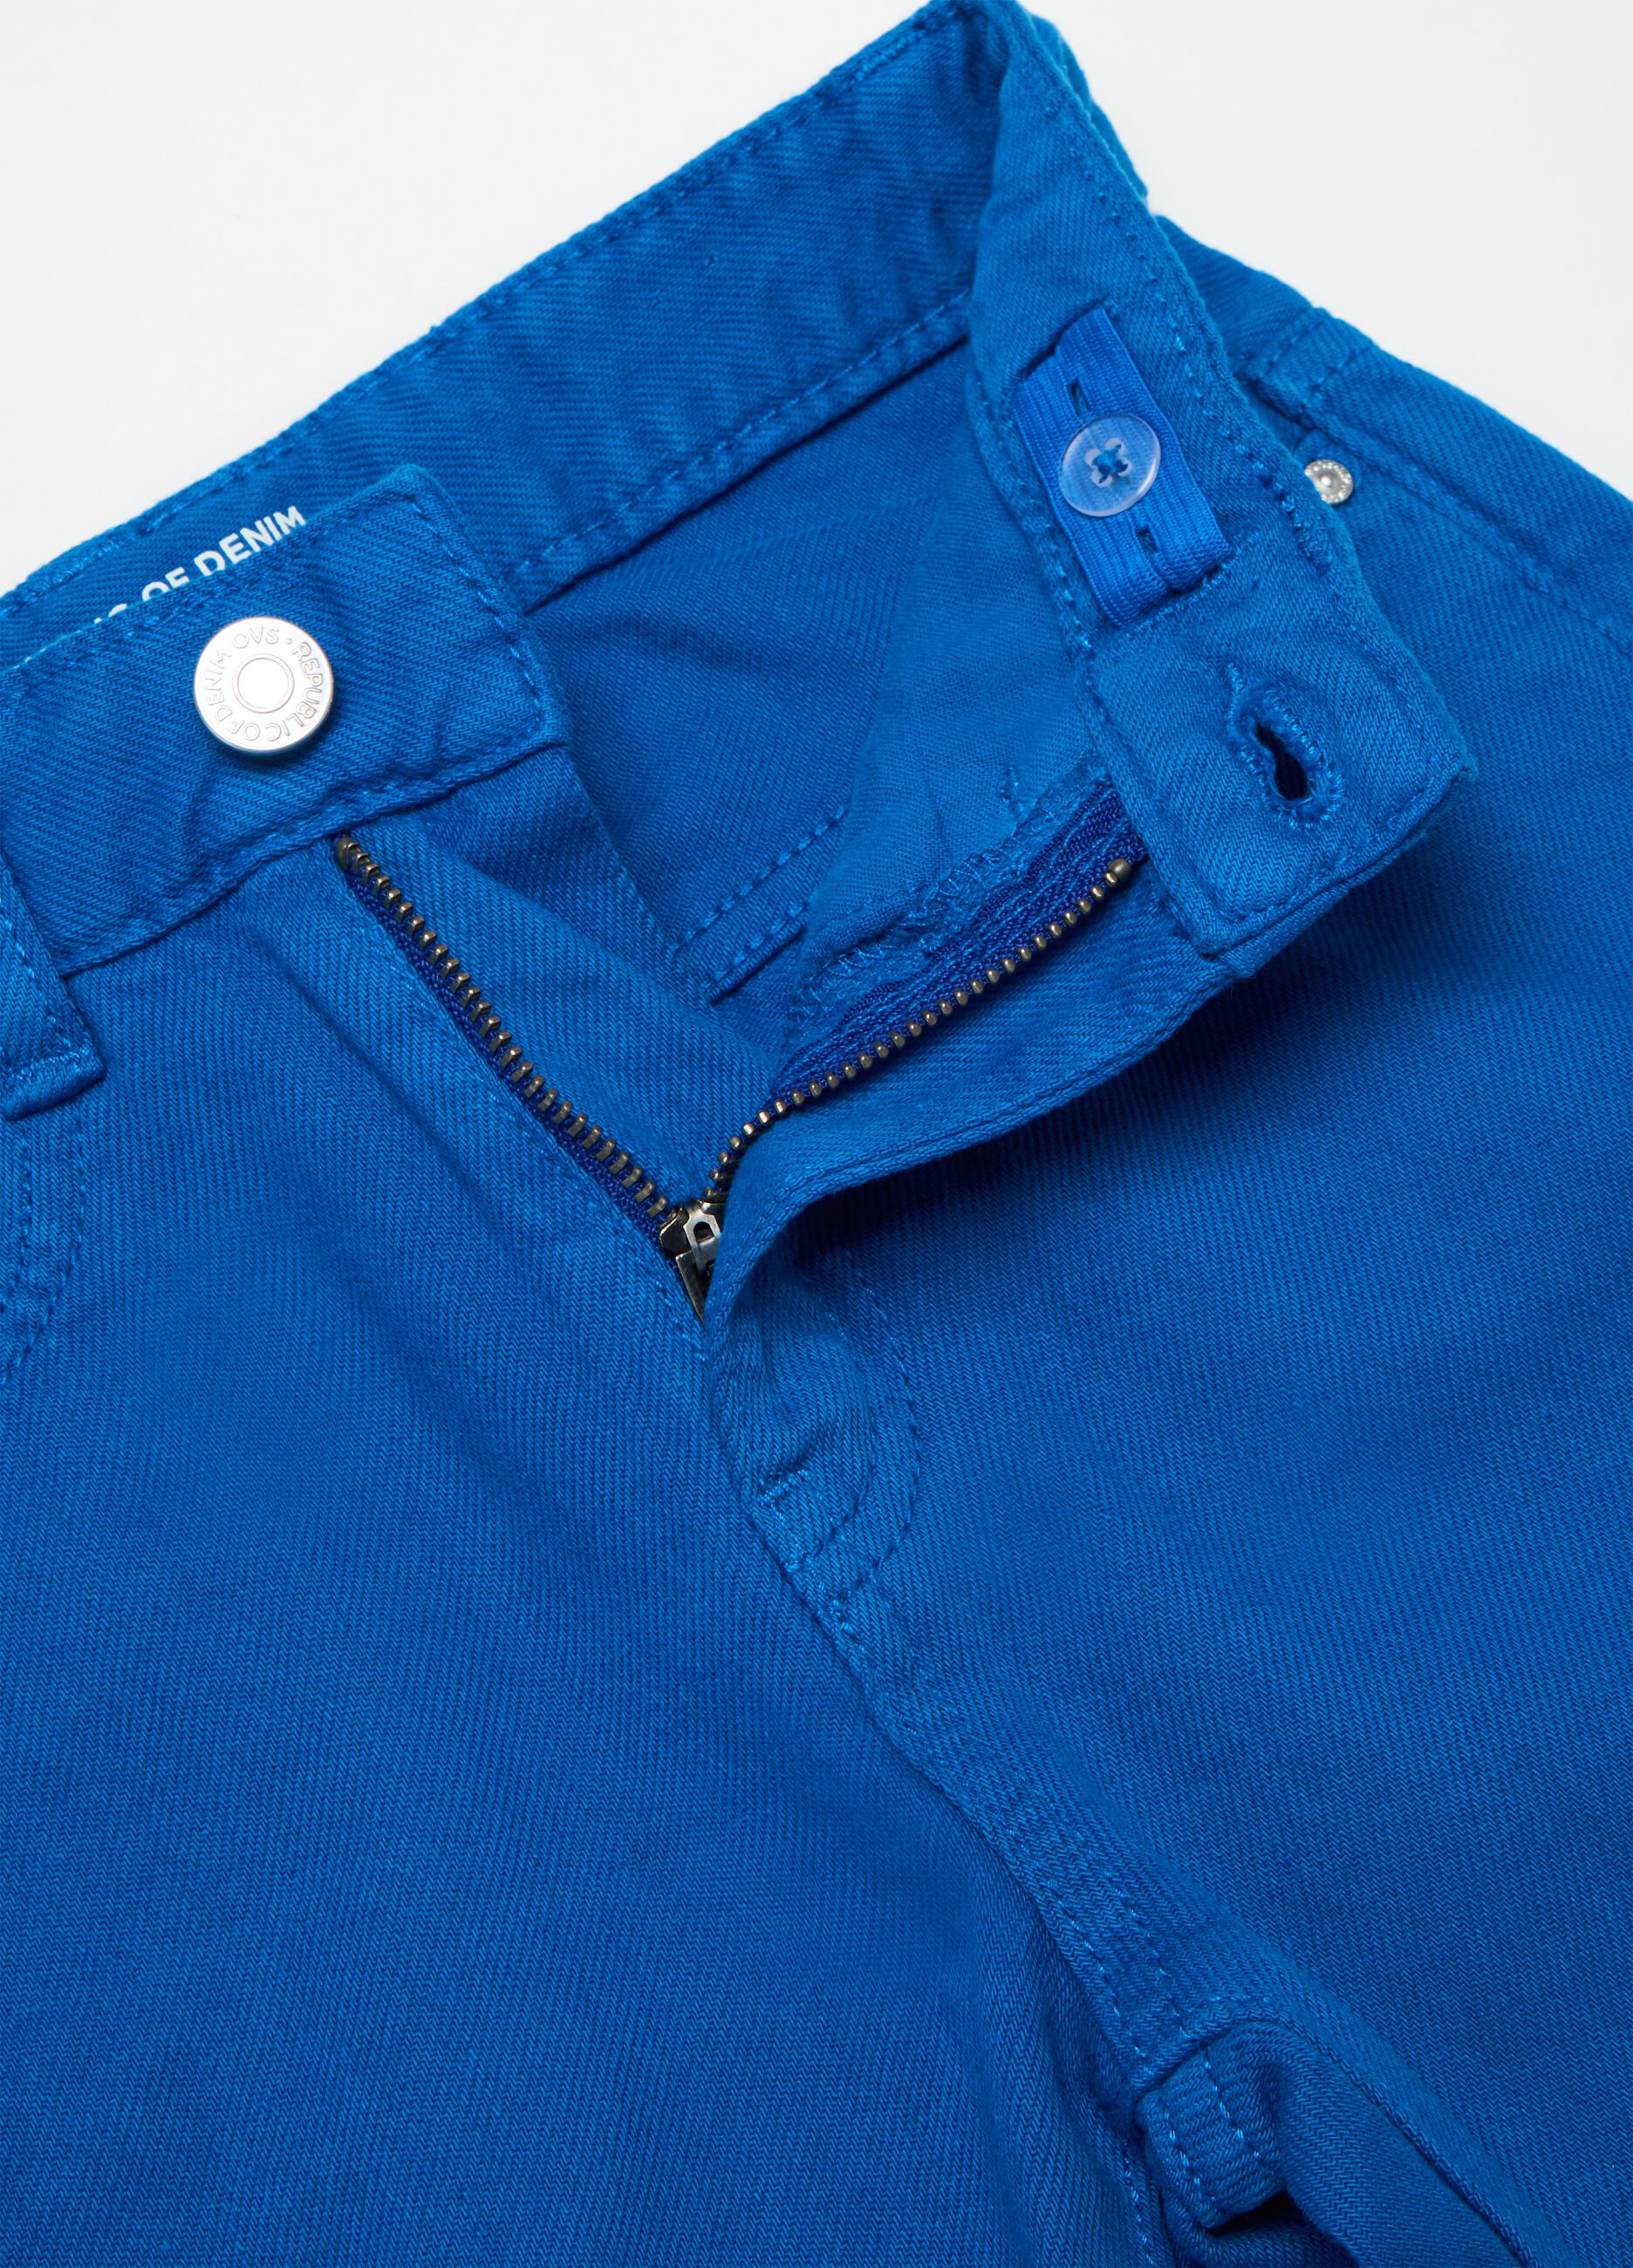 Loose-fit jeans with five pockets